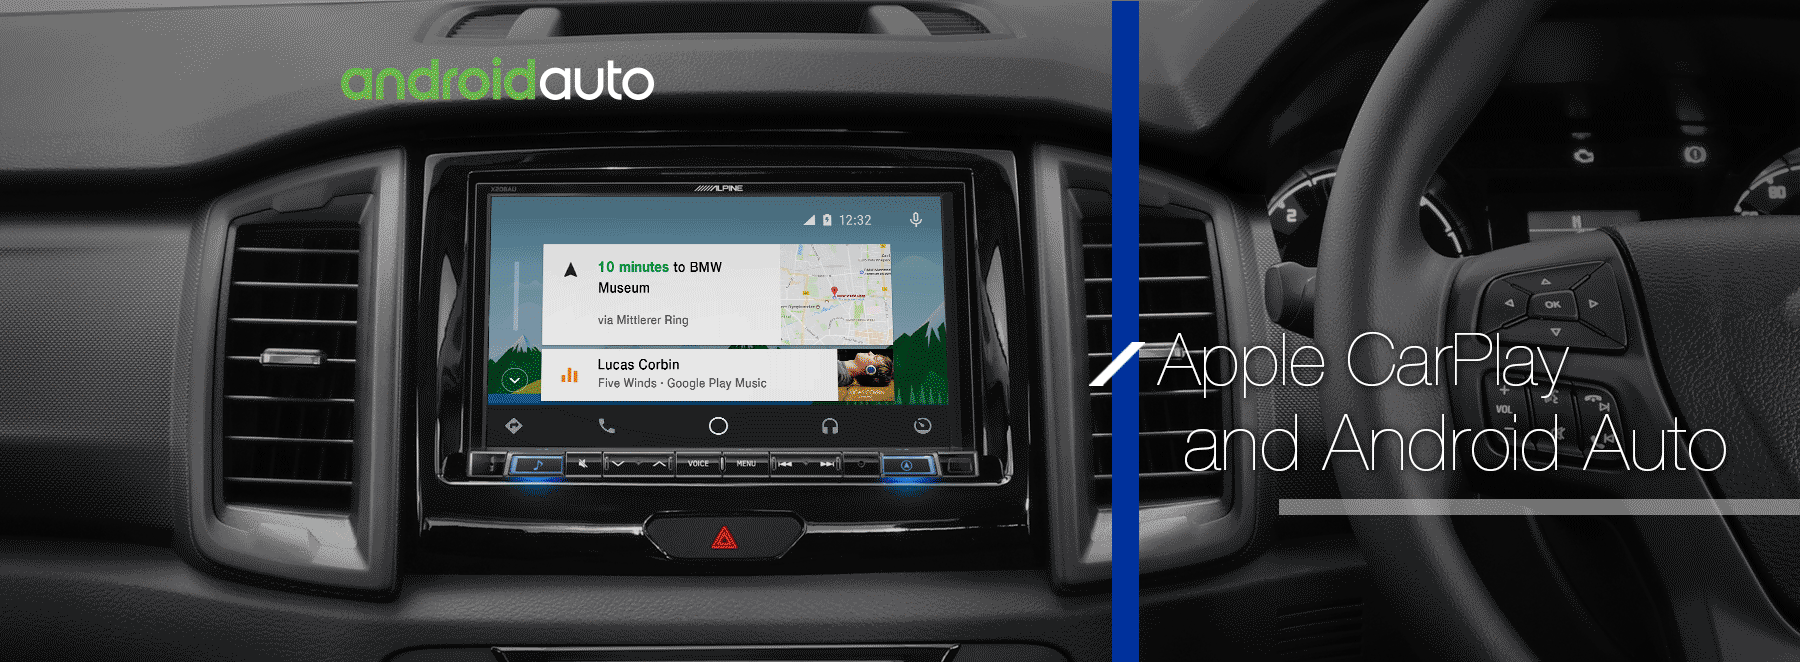 android auto apple car play